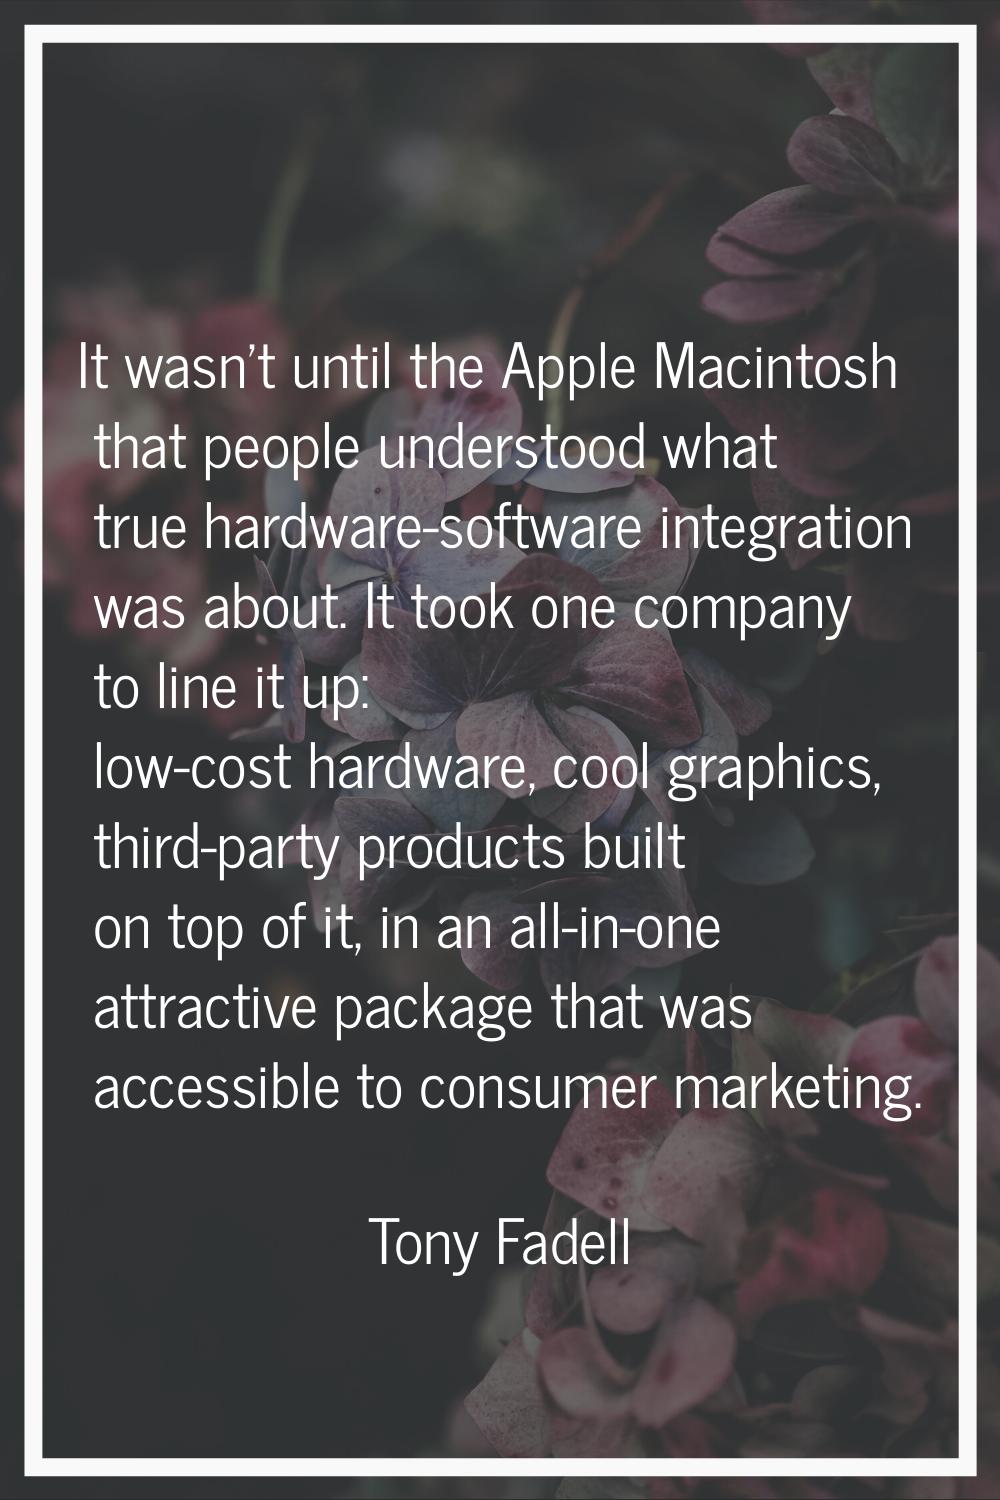 It wasn't until the Apple Macintosh that people understood what true hardware-software integration 